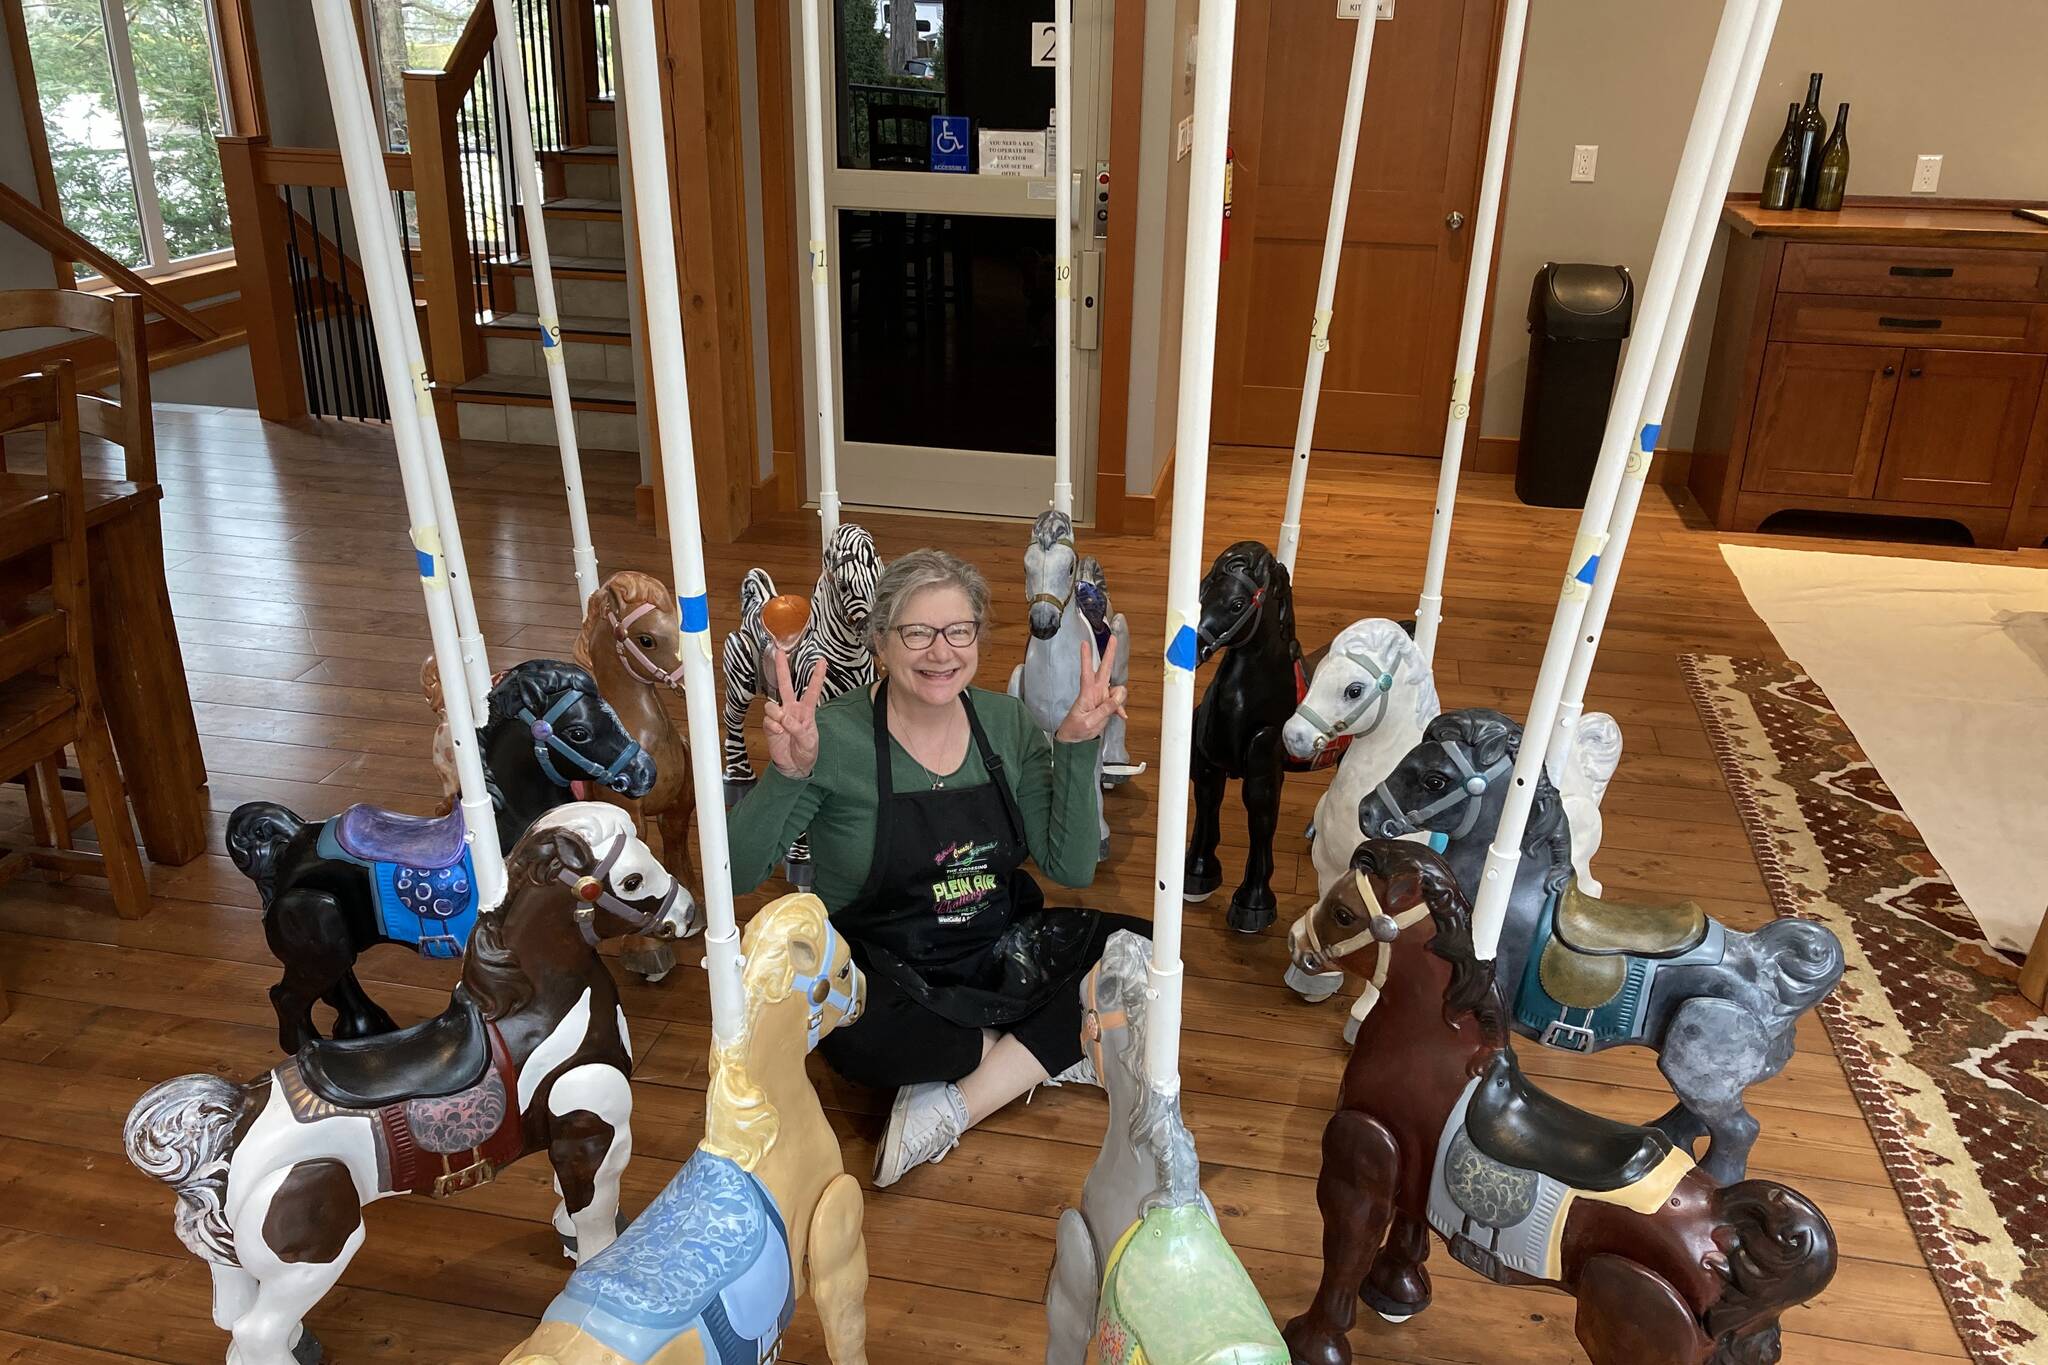 Artist Annette Resler poses, surrounded by recently restored carousel ponies. The carousel has made an appearance across the Lower Mainland, including in Vancouver, Chilliwack and here in Agassiz. (Photo/Annette Resler)